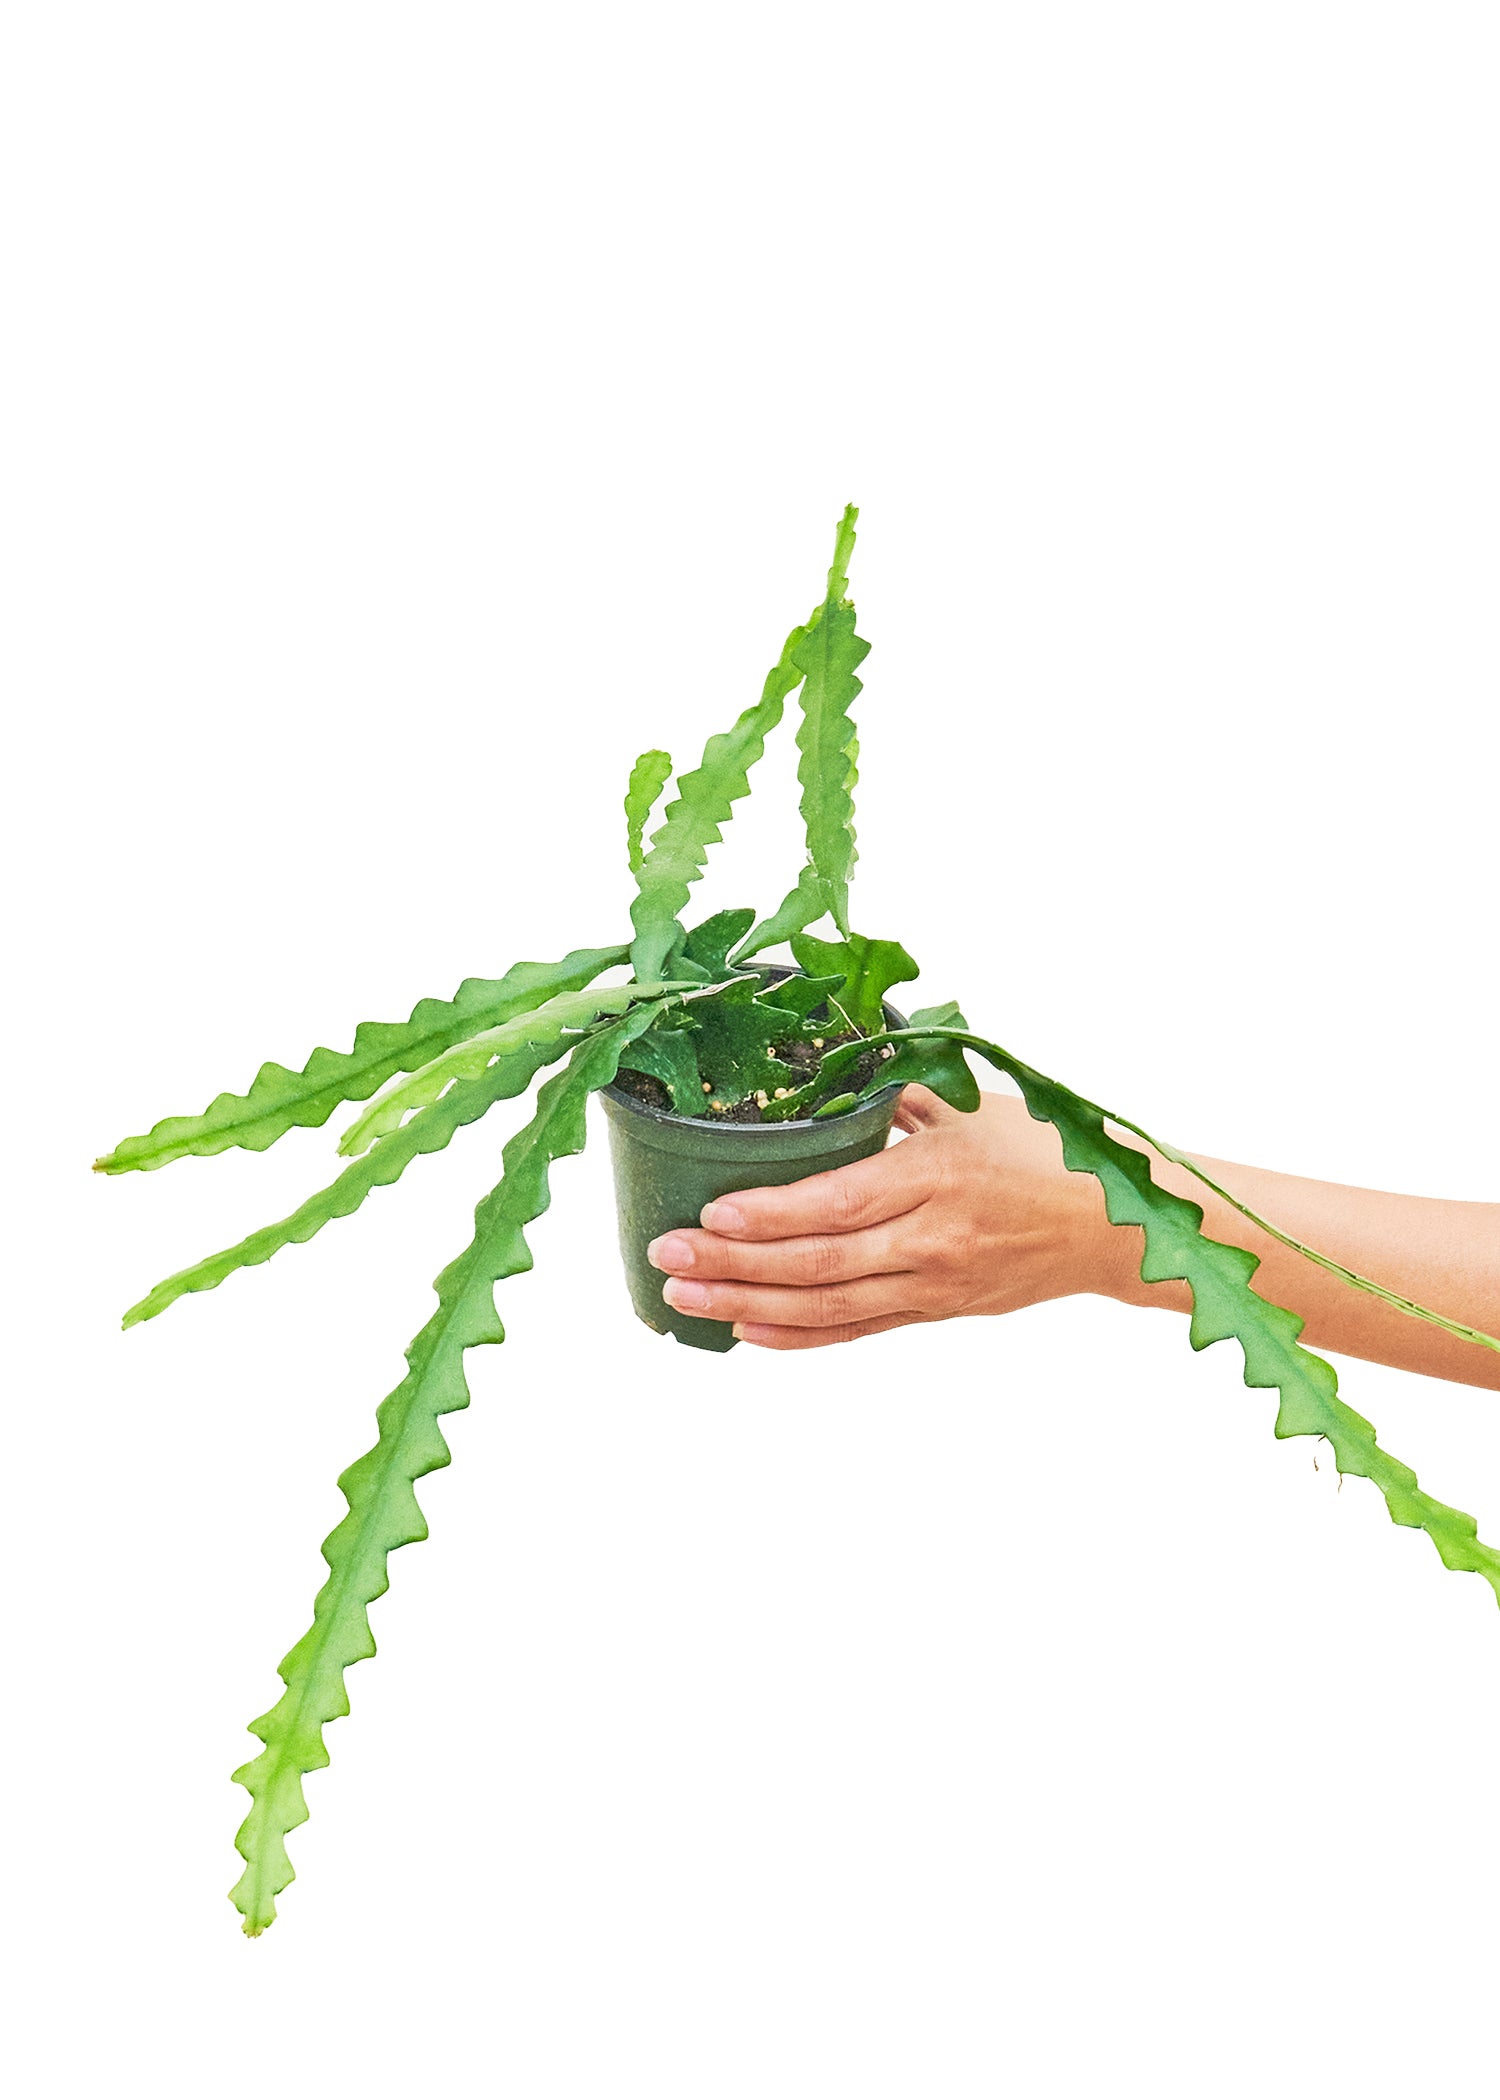 Small size Fishbone Cactus in a growers pot with a white background with a hand holding the pot showing the top view